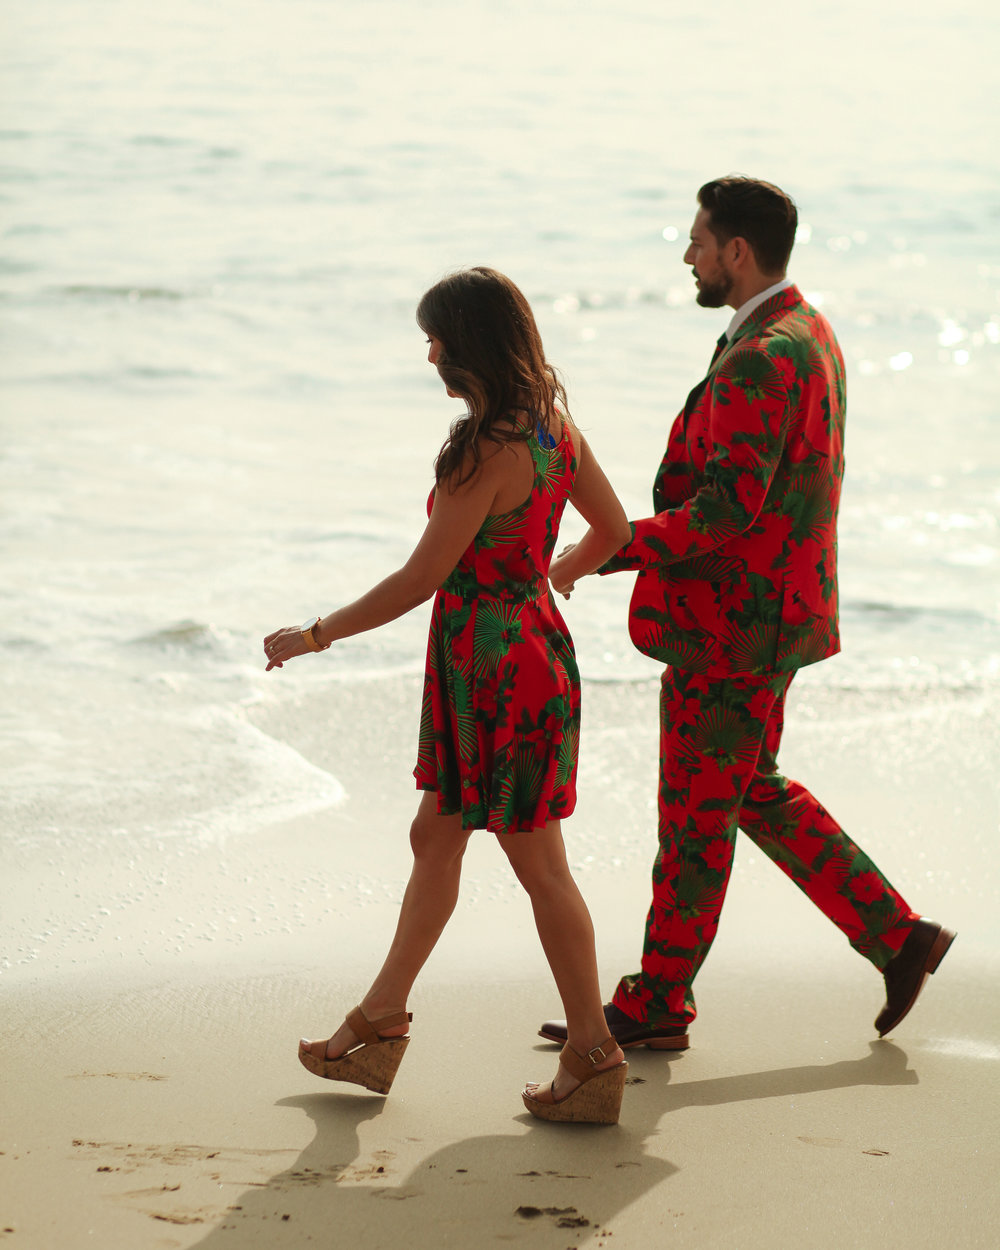 Christmas outfits, beach stroll, ugly Christmas sweater, party, ocean, couple goals